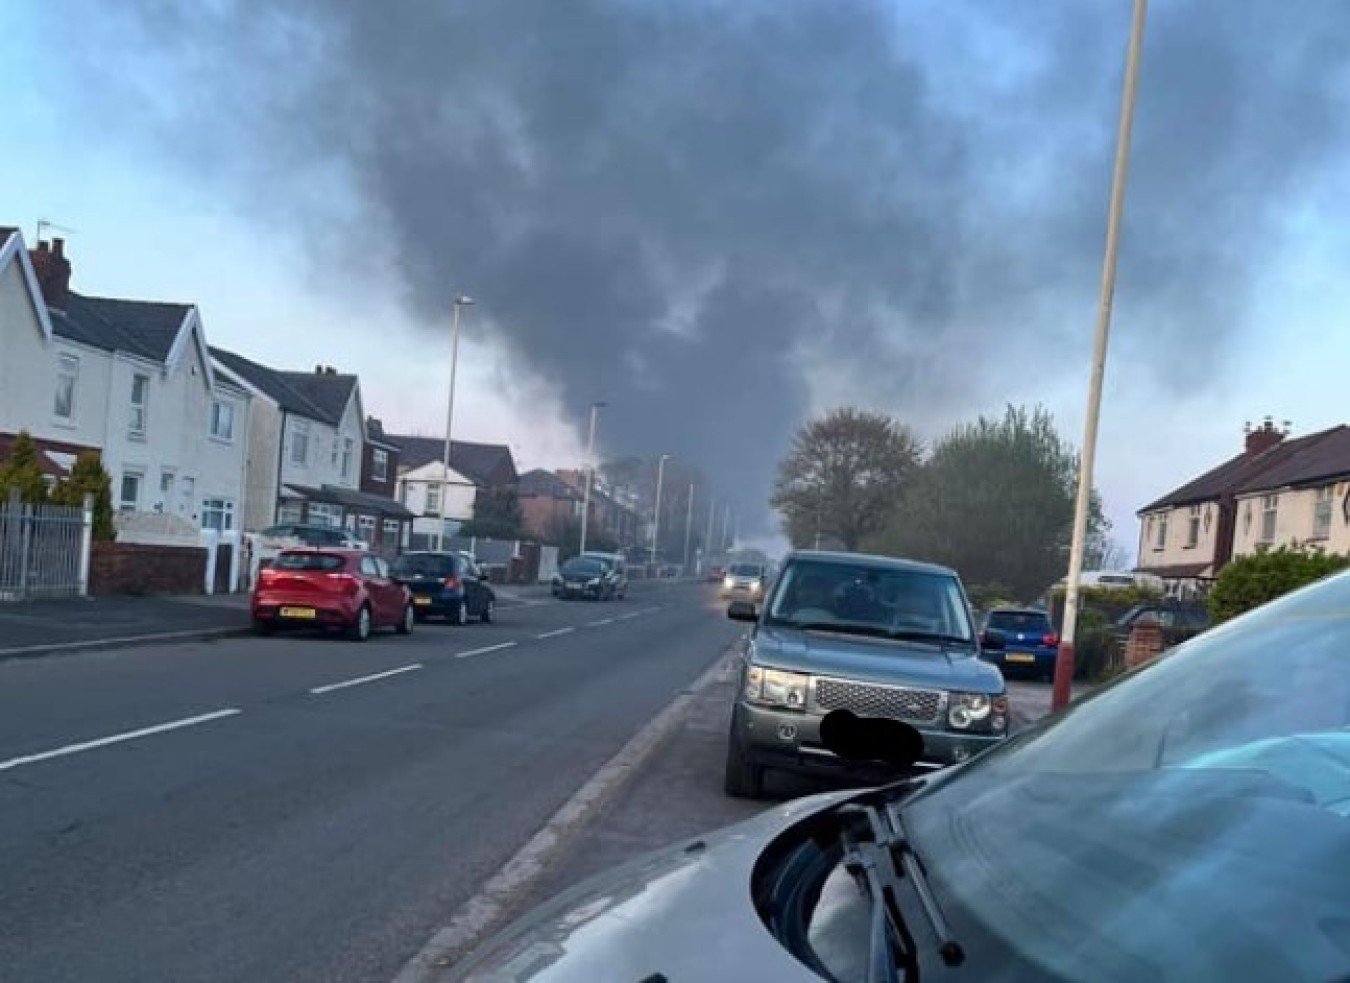 Fire crews tackle massive fire in Southport industrial unit - Eye on  Southport